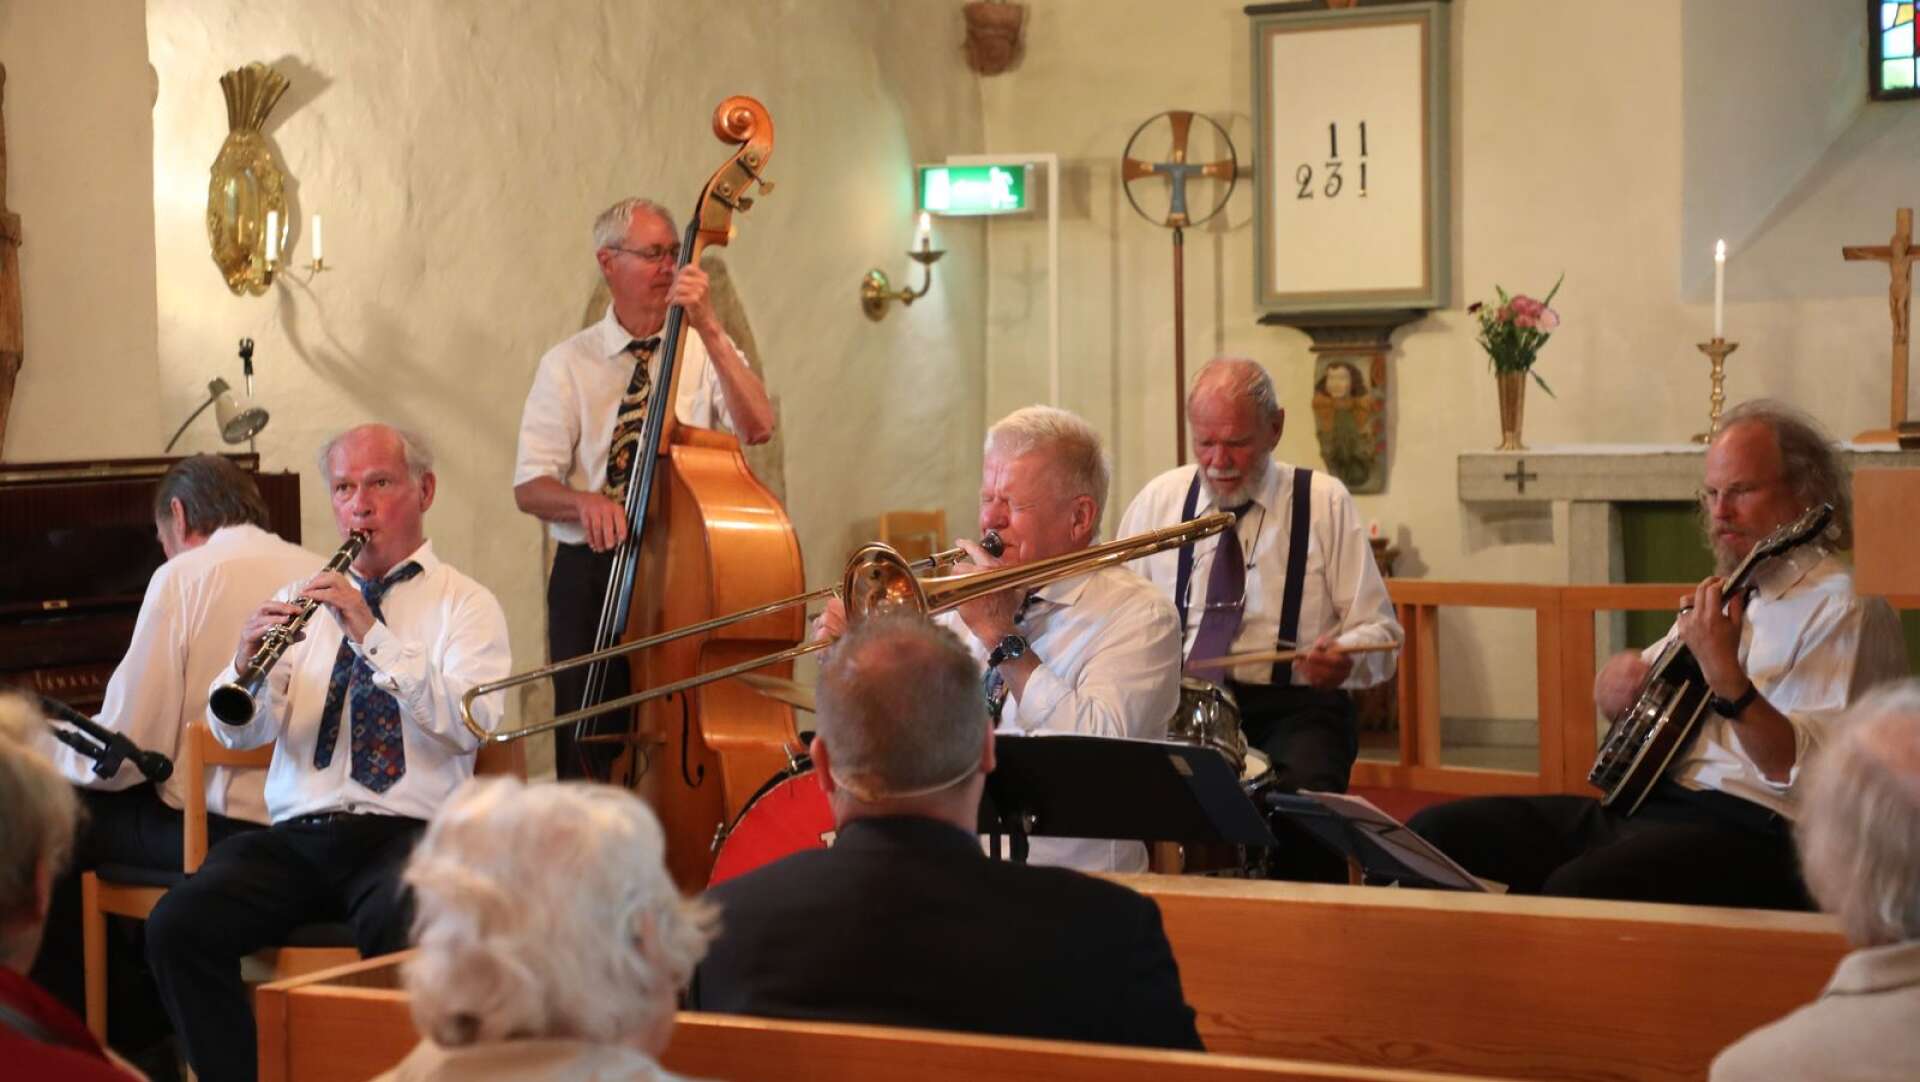 The Red Wing band spelade i Ransbergs kyrka.